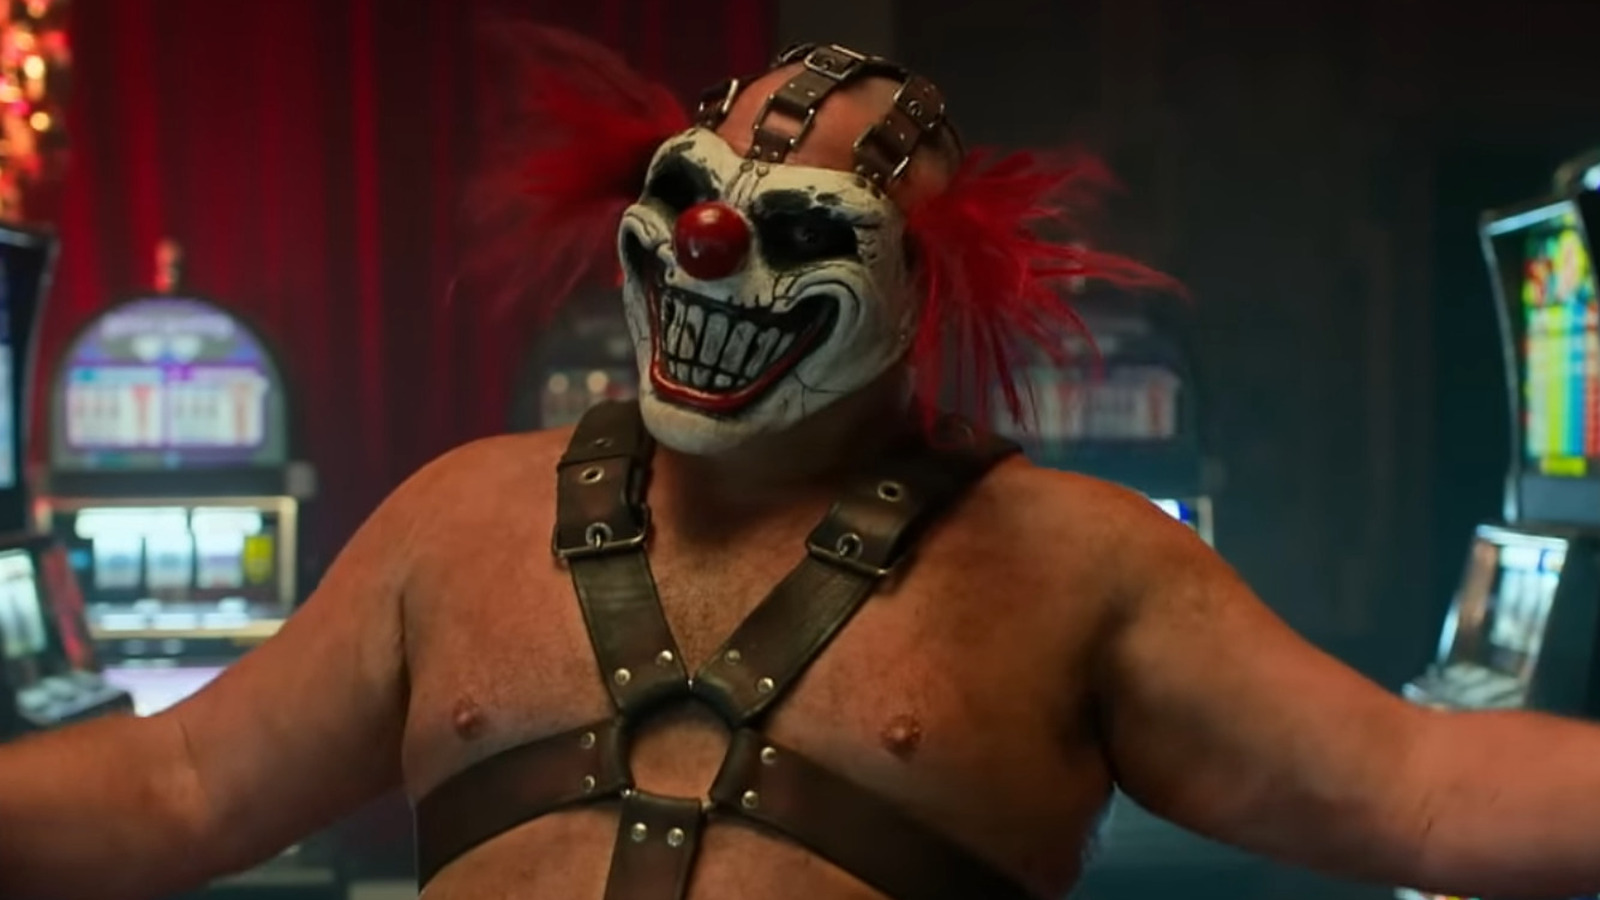 Get behind the masks in this Twisted Metal video